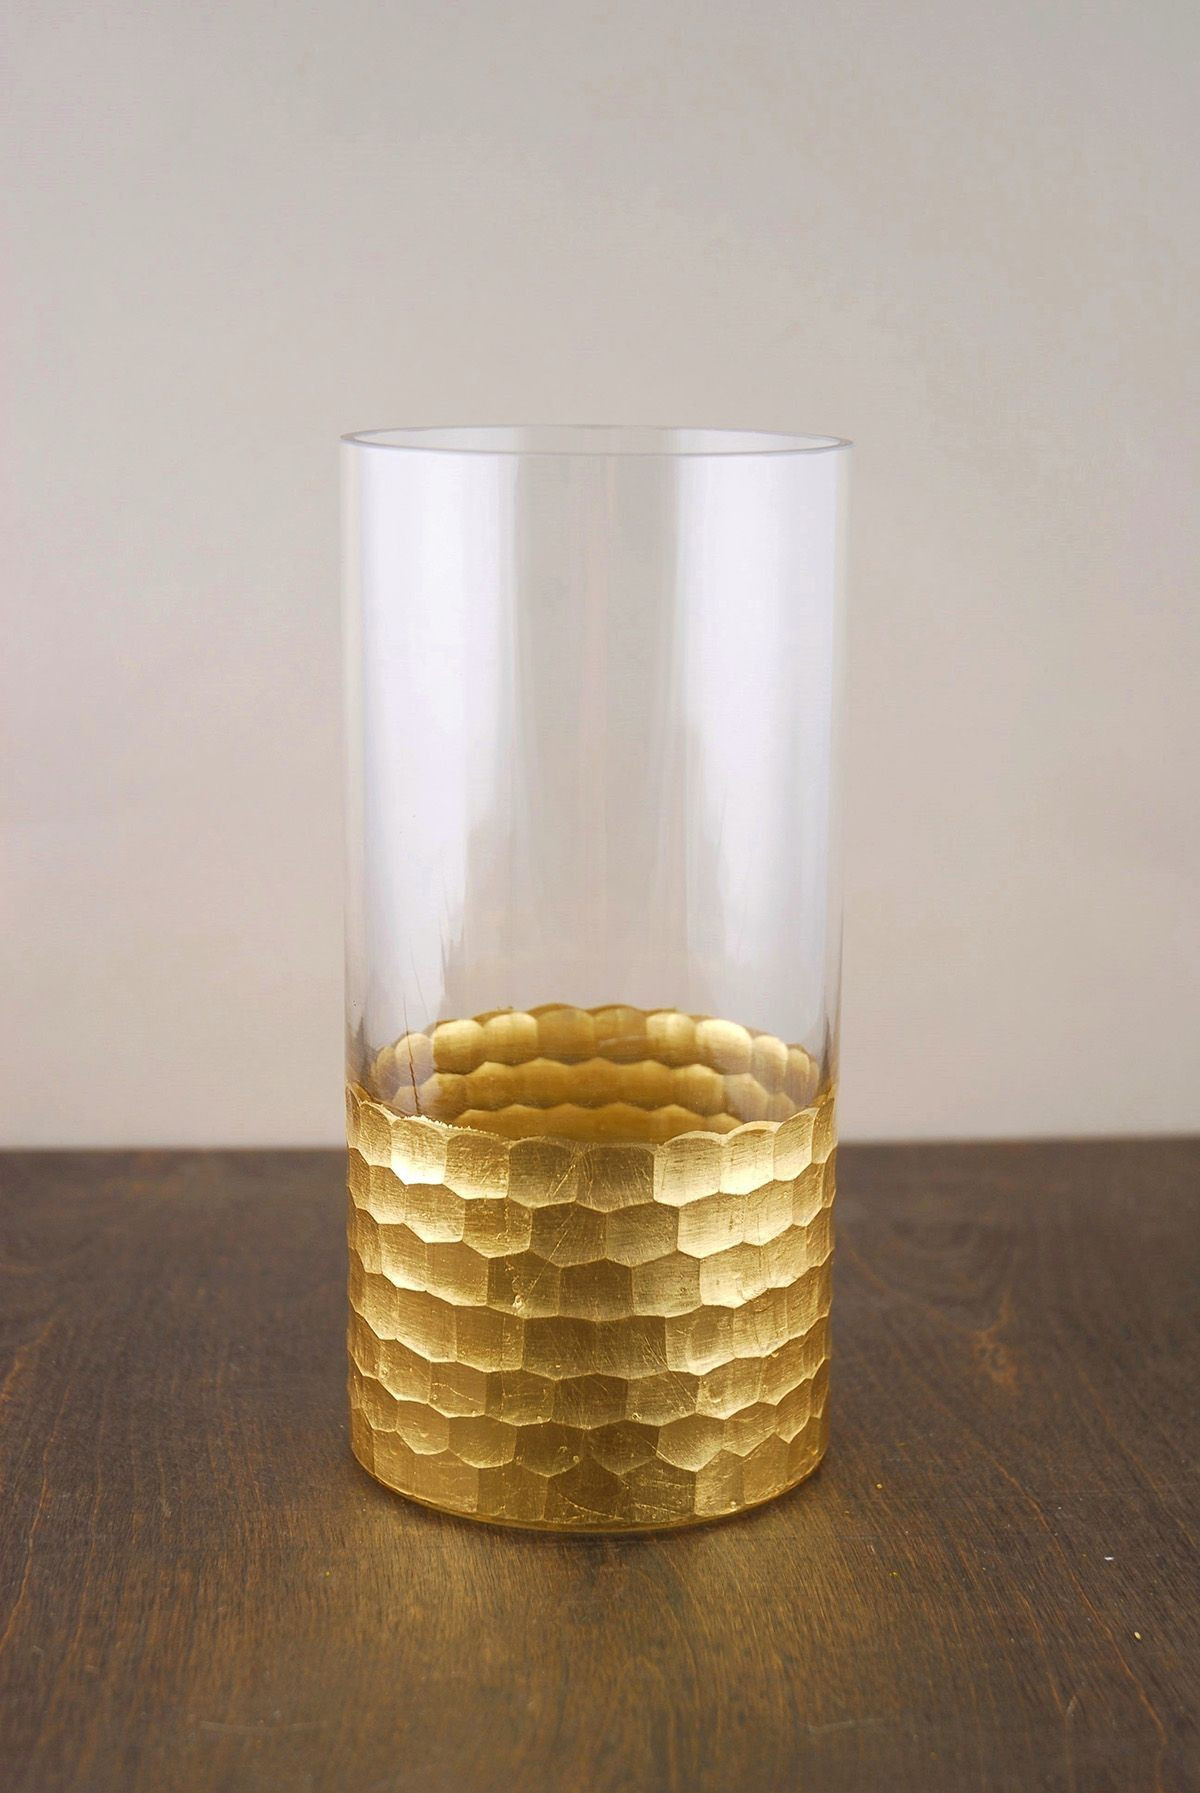 15 Trendy Mercury Glass Floor Vase 2024 free download mercury glass floor vase of gold mercury glass vases inspirational gold cylinder vases with gold mercury glass vases inspirational gold cylinder vases collection silver and gold mercury glas